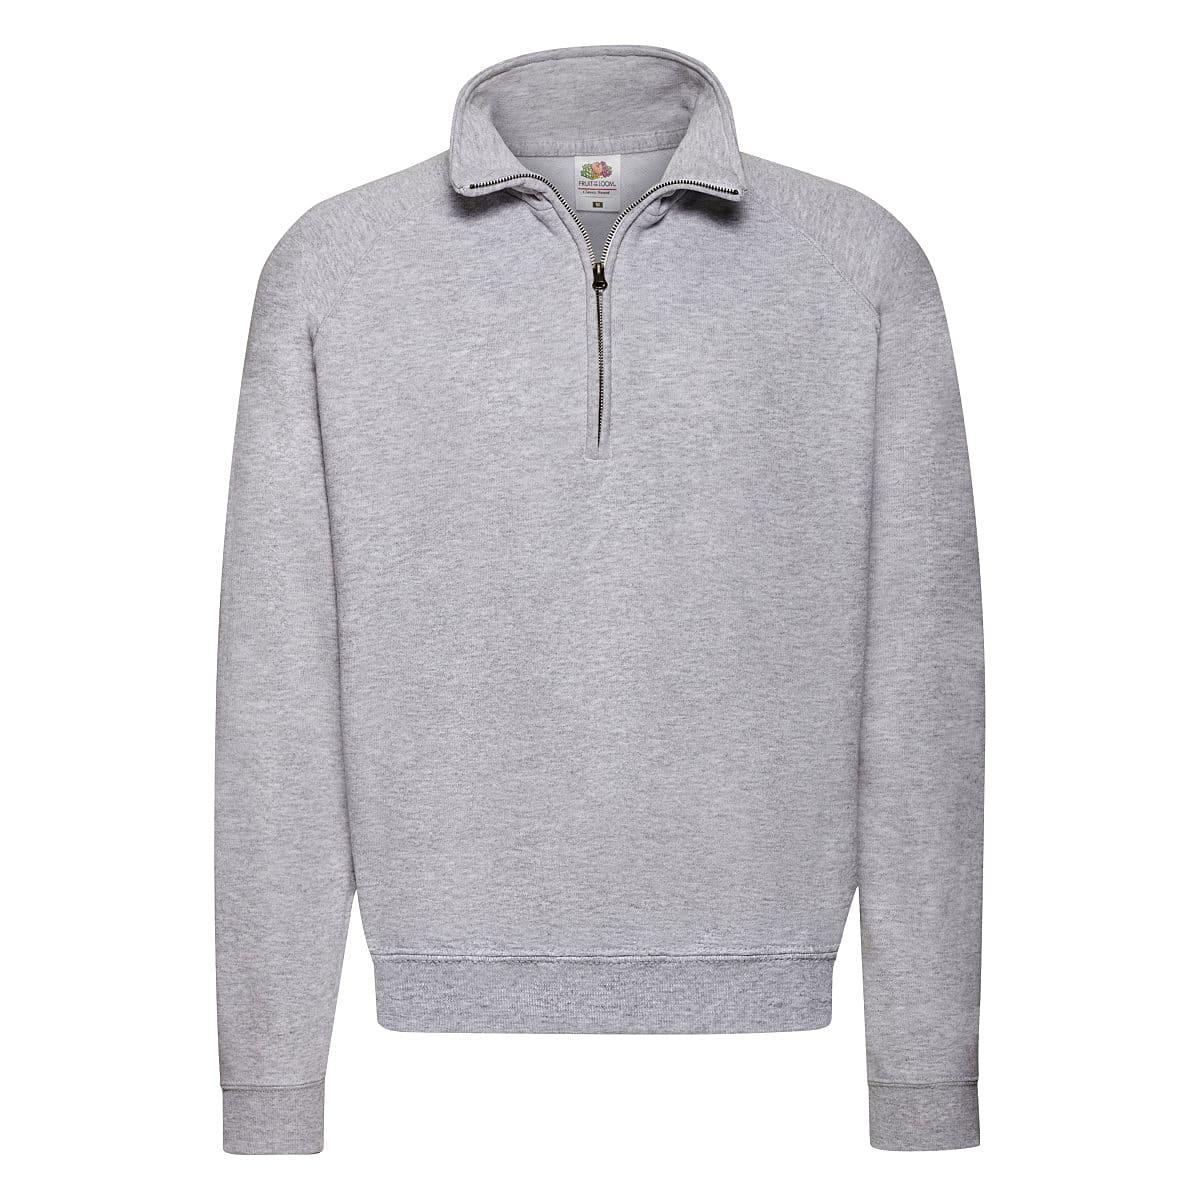 Fruit Of The Loom Mens Classic Zip Neck Sweater in Heather Grey (Product Code: 62114)